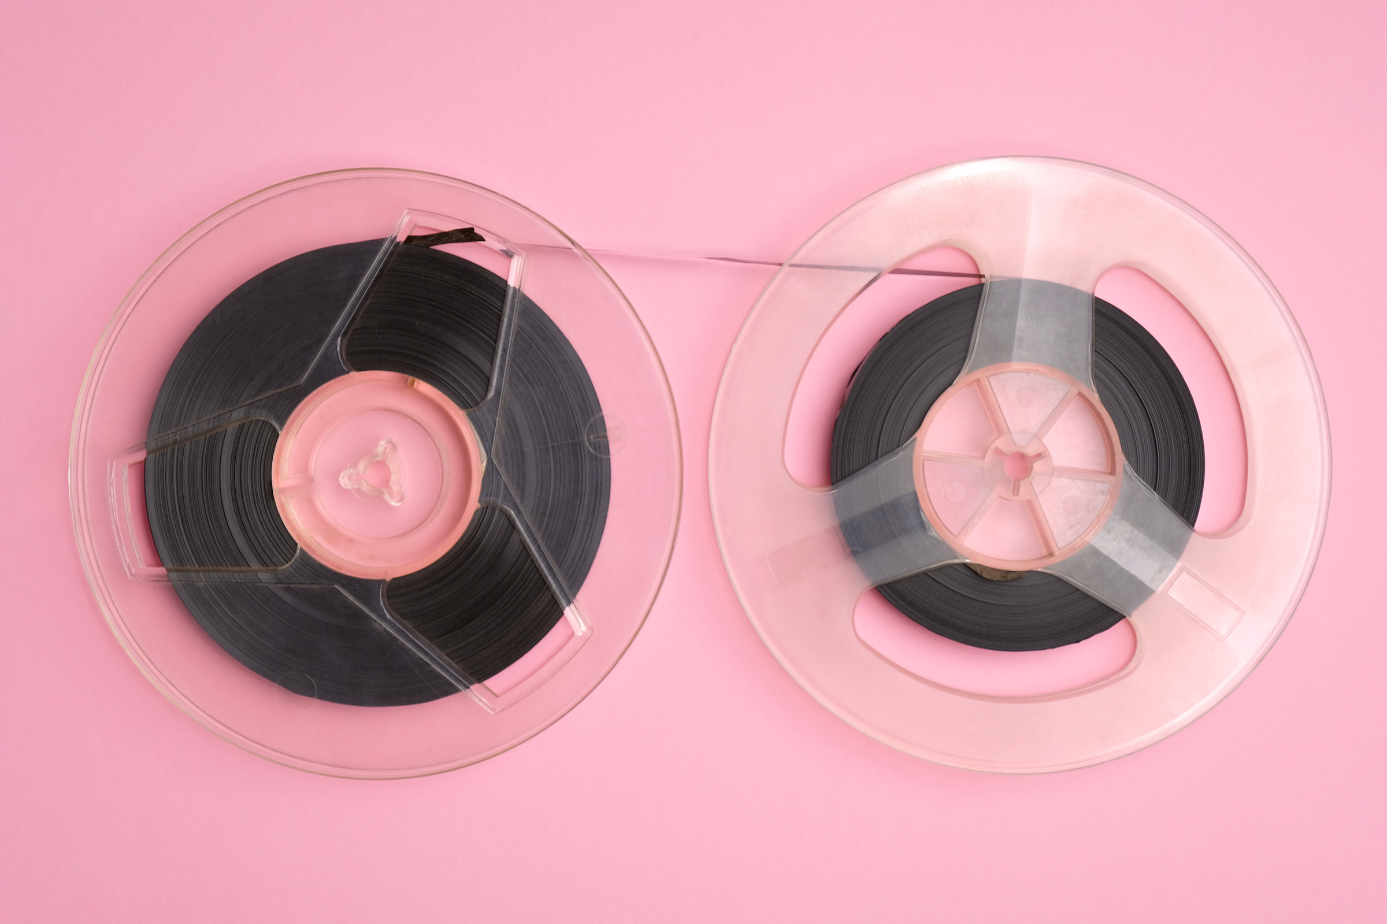 Two plastic transparent reels, side by side, with tape spooled on one reel and connected to the other reel